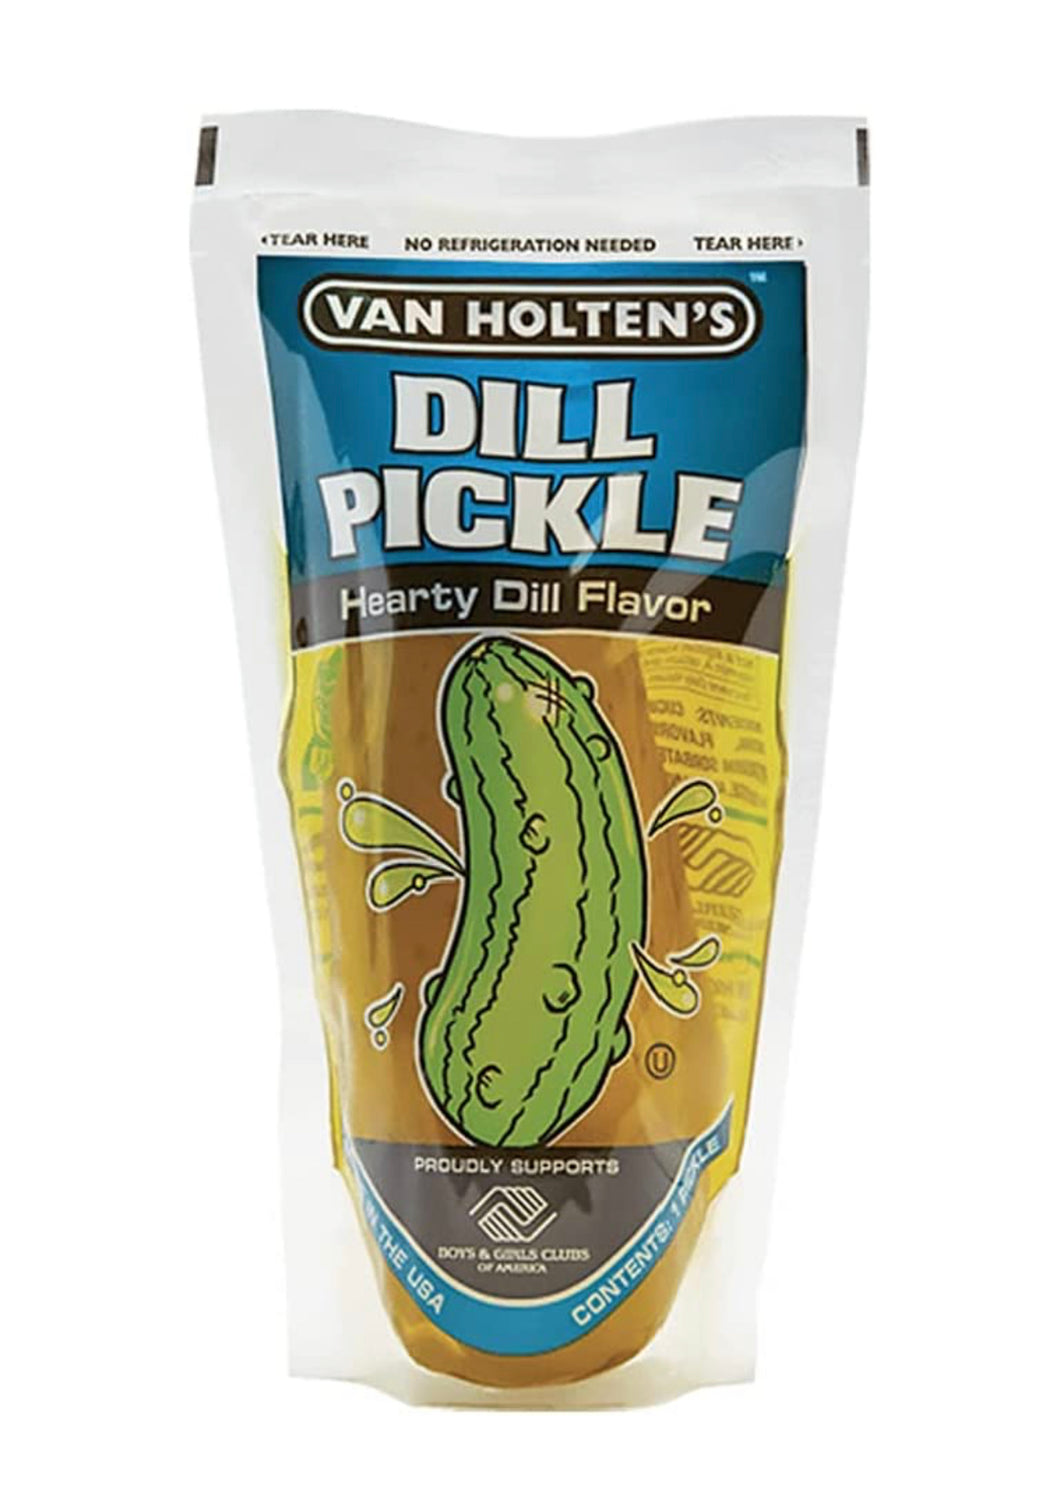 Pickles in a pouch Dill Pickle